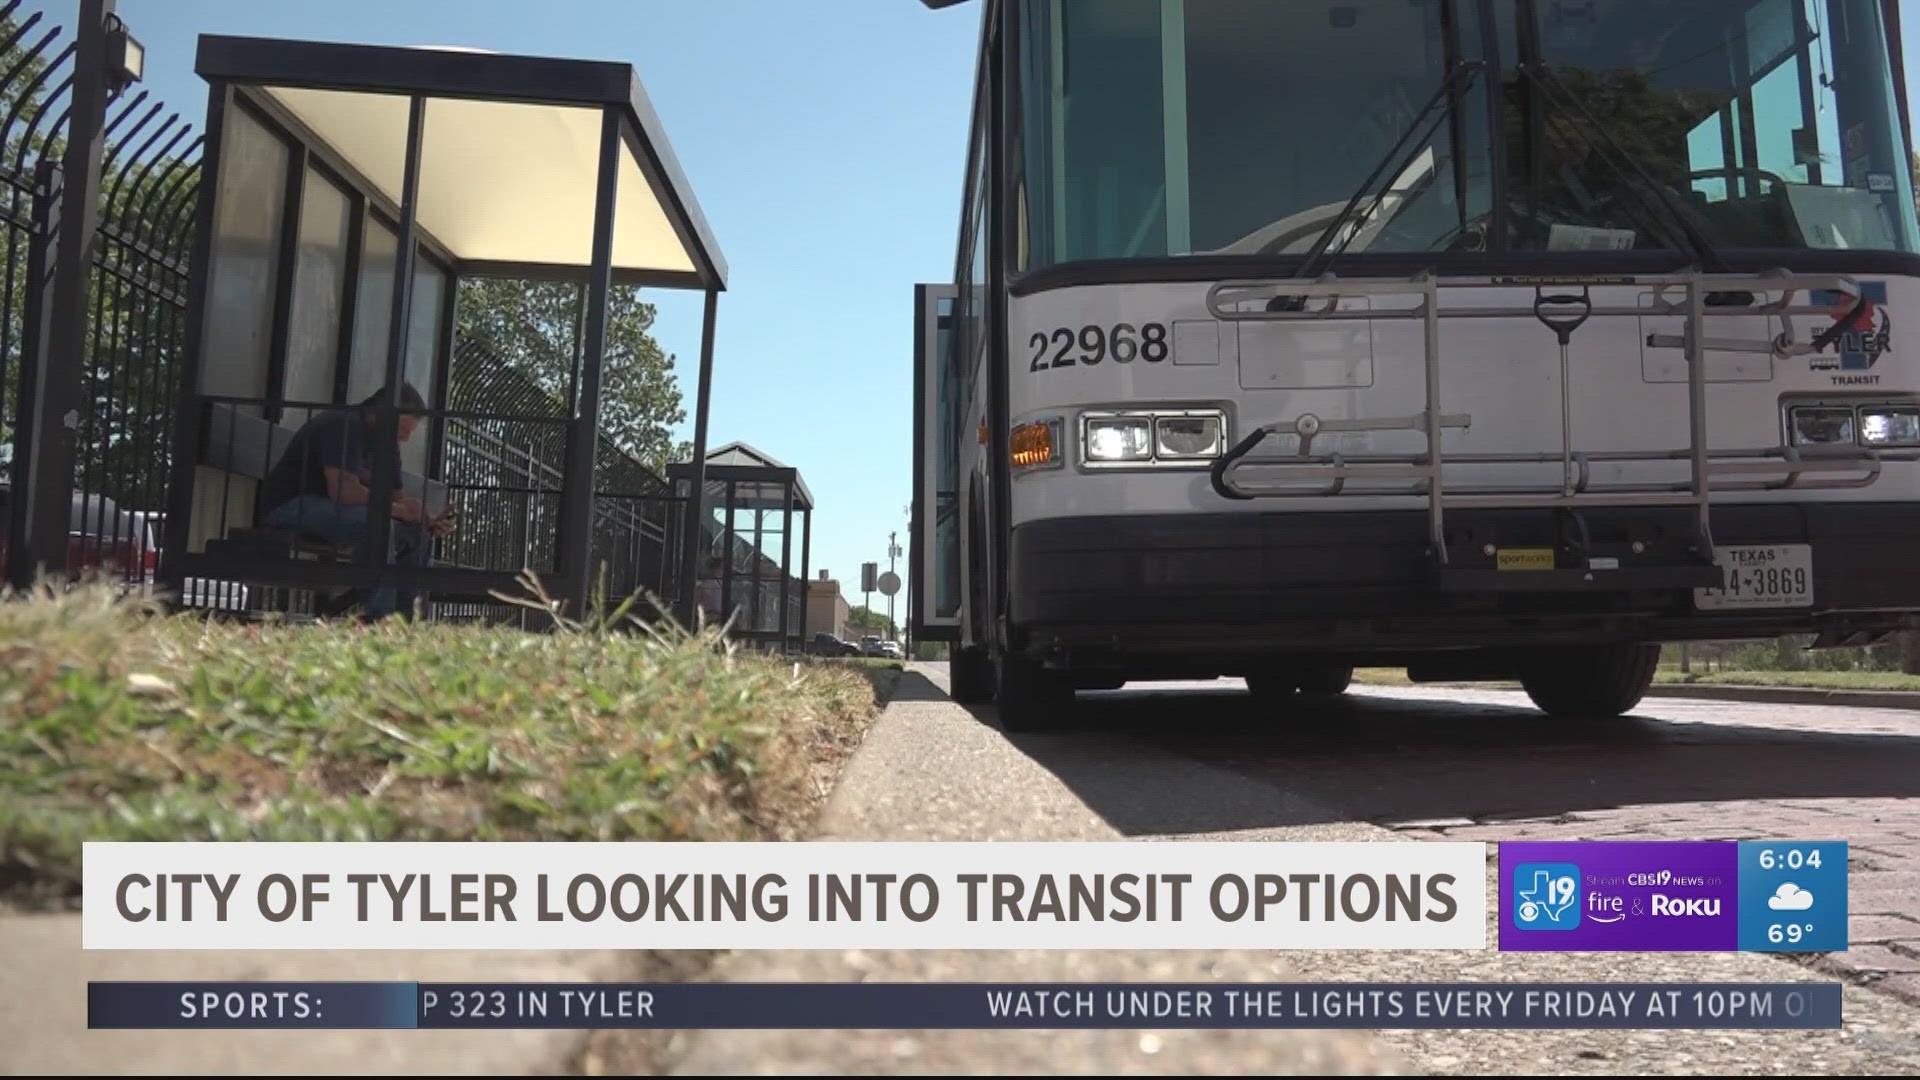 City of Tyler seeks ways to make transit rates affordable following proposal to double fares